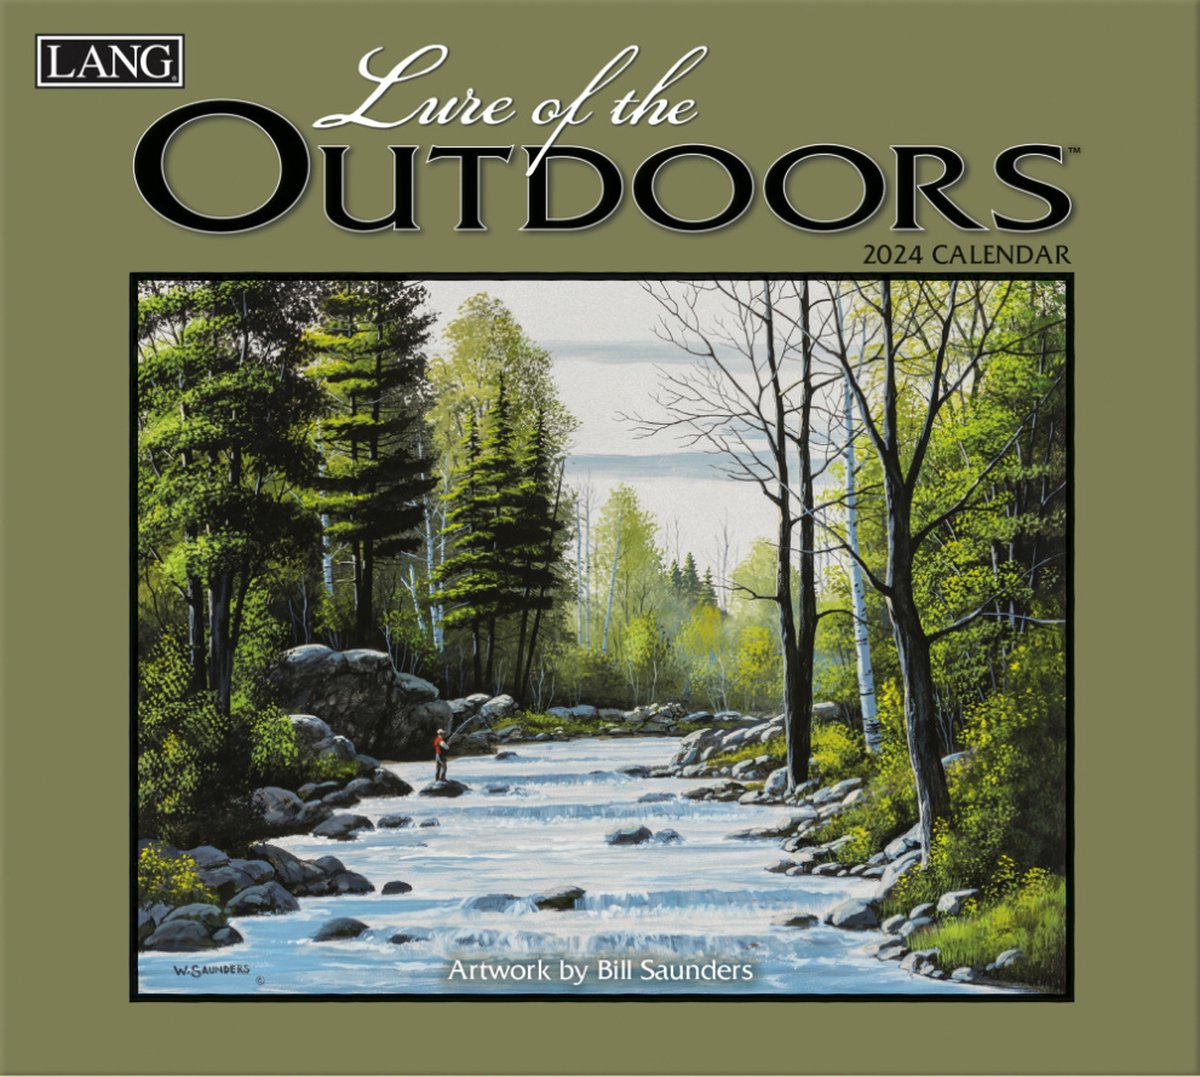 Lure of the Outdoors Kalender 2024 LANG